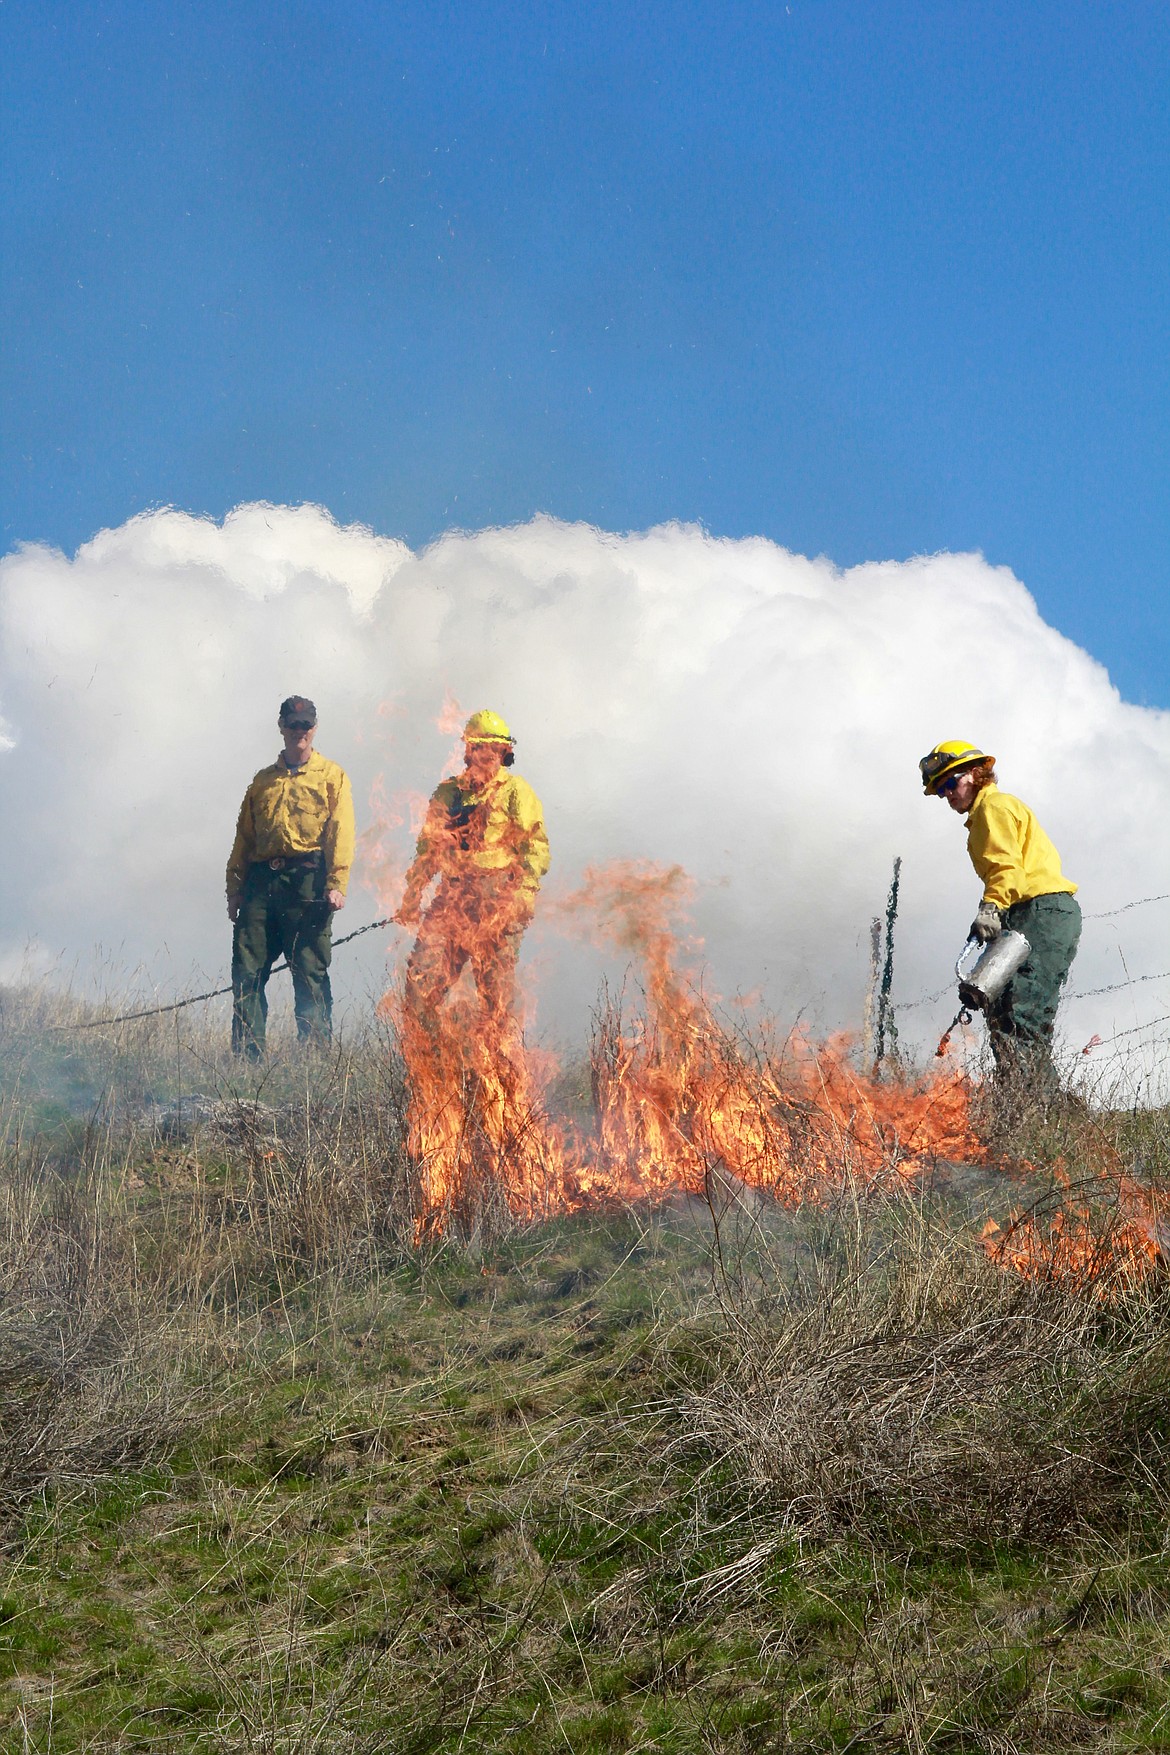 Plains-Paradise Rural Fire Department members from left: Marlin Cooper, Brian Reed, and Ian Smith are working on a controlled burn they set and are extinguishing on Upper Lynch Creek near Plains.